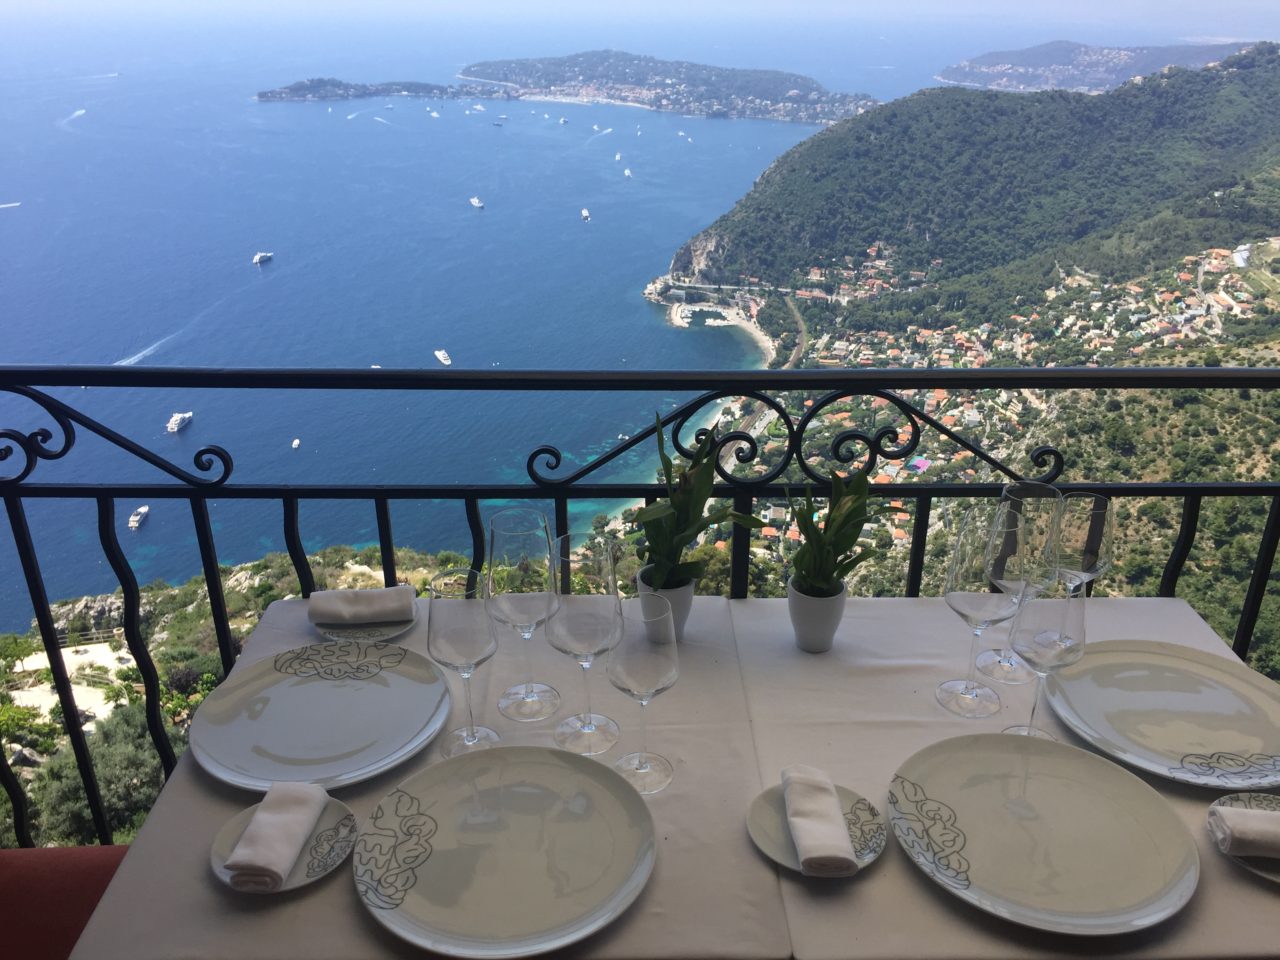 Lunch at Chateau Eza in Eze near Nice ~ When in Nice, we live to eat !